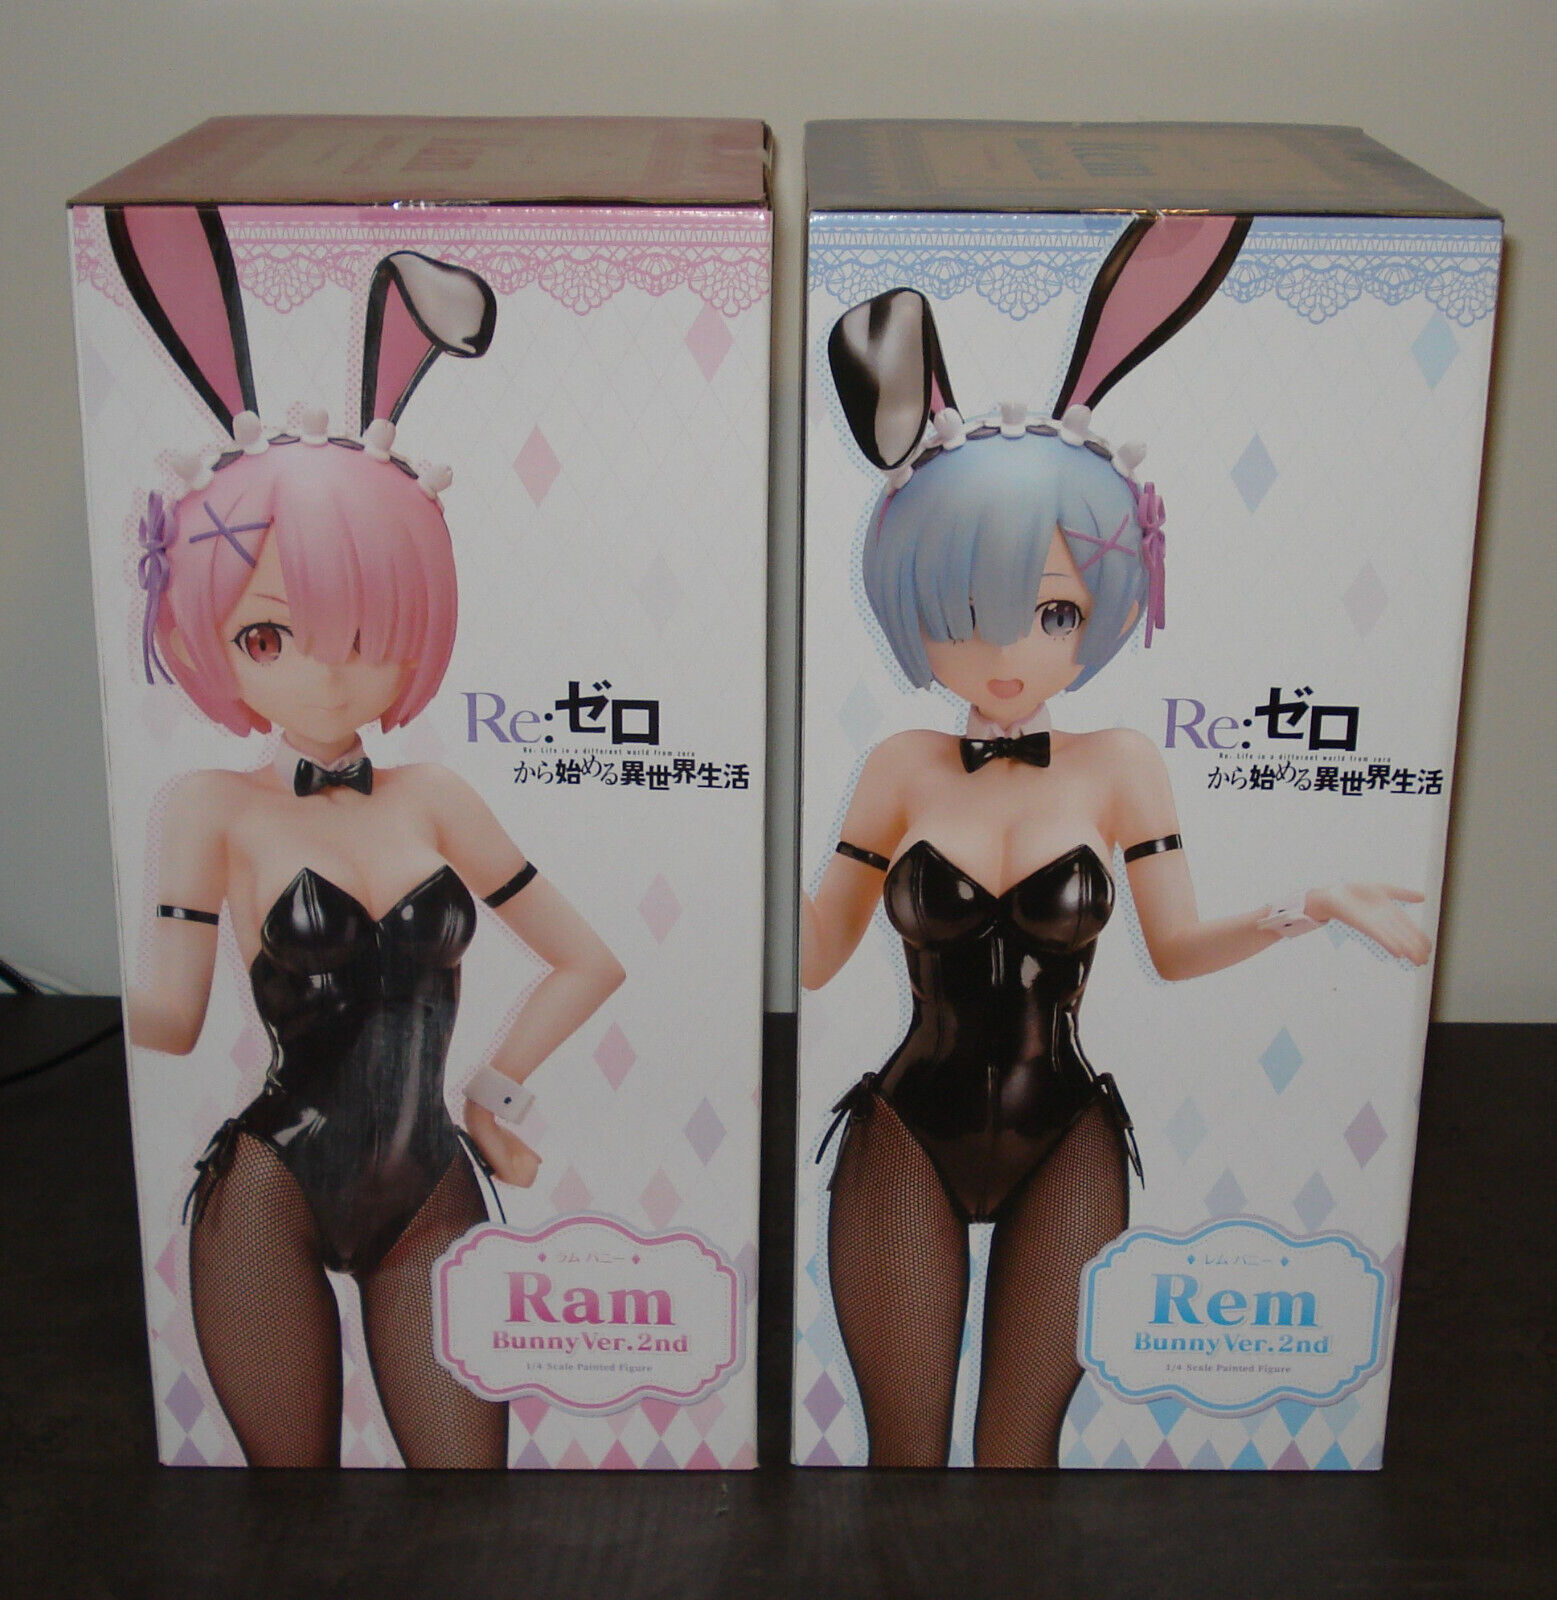 New - Re:Zero Rem and Ram Bunny Ver 2nd 1/4 Figure (FREEing)